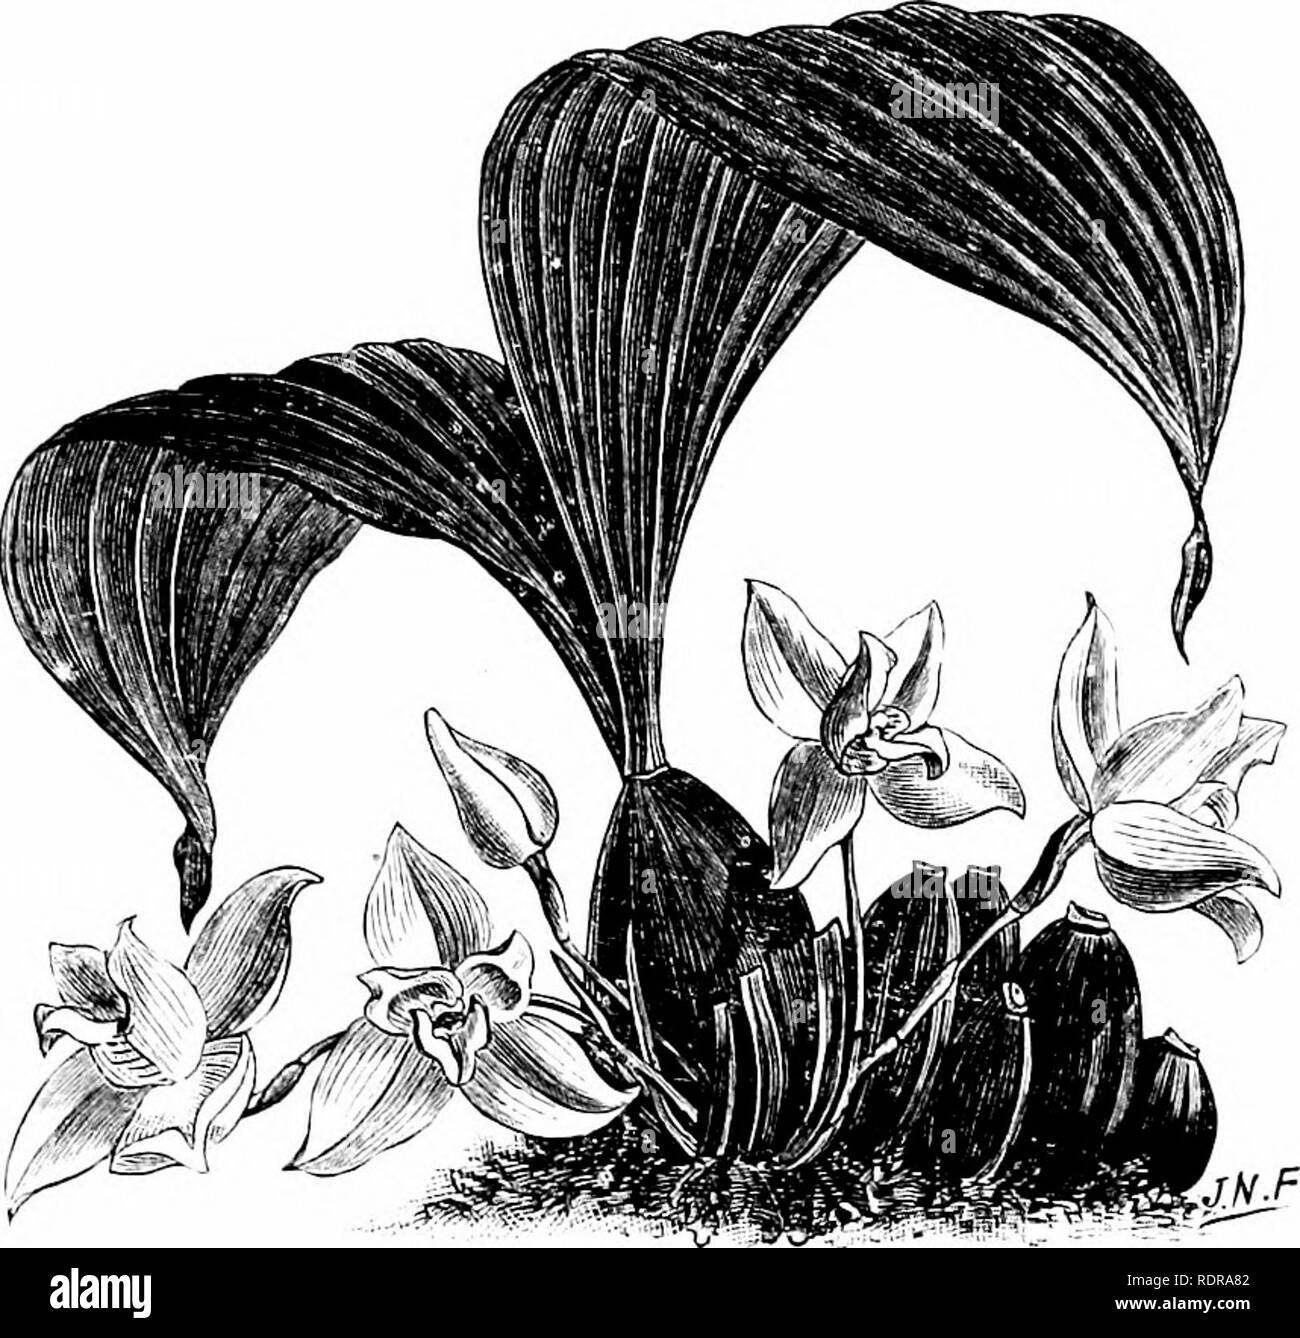 . The orchid-grower's manual, containing descriptions of the best species and varieties of orchidaceous plants in cultivation ... Orchids. LYCASTE. lb UK-hrs Vnvr; thr scap,. is produced from the base of the bulbs, bearin--a single timve,-, .seTeral scapes spriugiug irom tlie same bulb; sej.als and petals yeloAvusli-.vlnte; lip ^vh^tc. fringed at the sides. Flowers iu January an,l t cbruai-y.- - U. S. of f 'oJomhia. ââ 7/'''?â T&gt;',H'â ''â 'â '''&quot;â &quot;â *â ''-&quot;â &quot;''''''&quot;' -'&quot;&quot;&quot;&quot;â ^iibt. 384; Lh.,!,ua,.x.t.22o: J,.urâ Ij. 'irniil' s beinseudobullis a Stock Photo